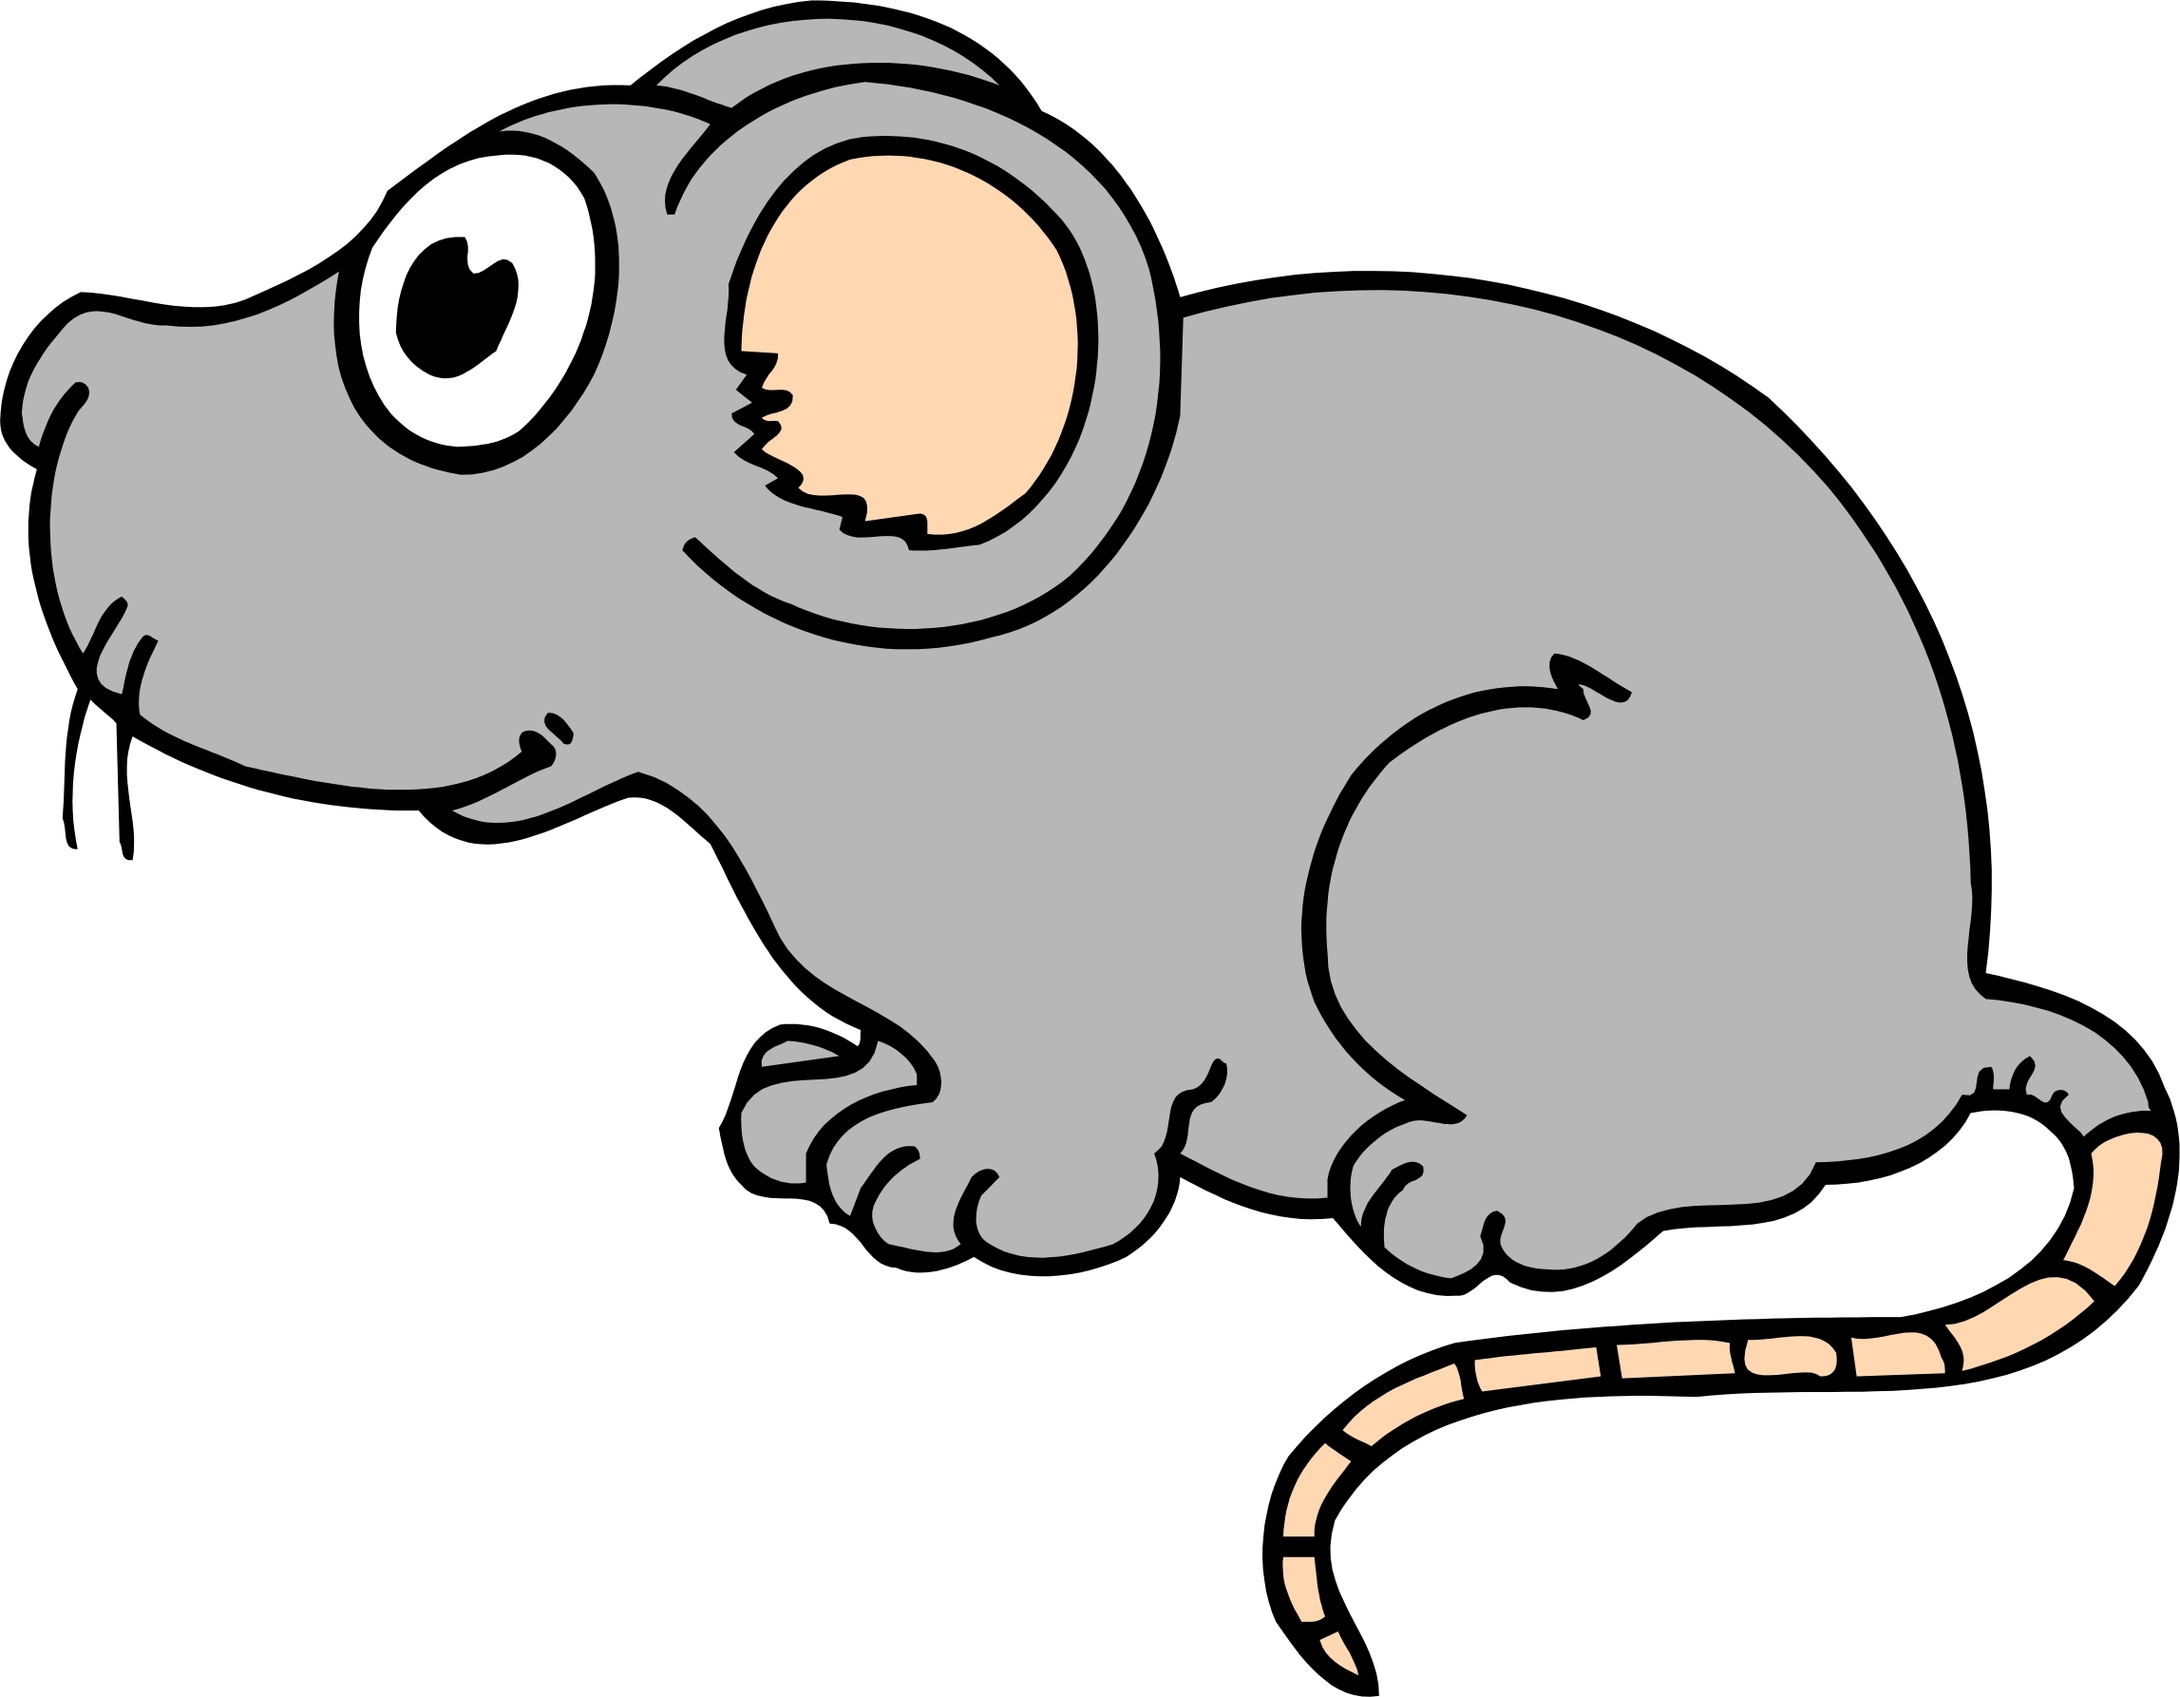 Mouse Cartoon Images Clipart - Free to use Clip Art Resource